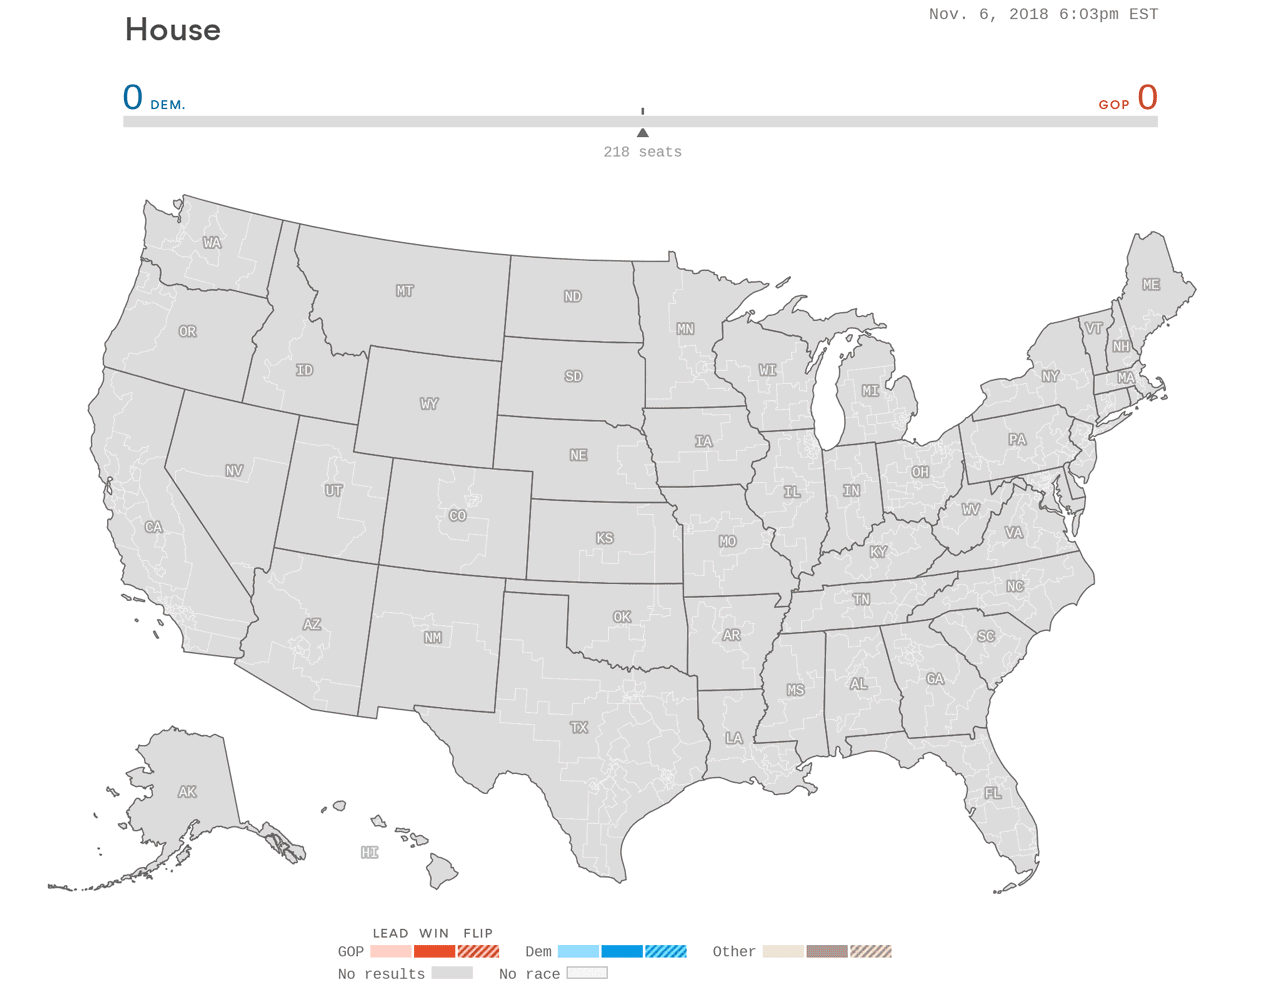 Timelapse of U.S. House elections